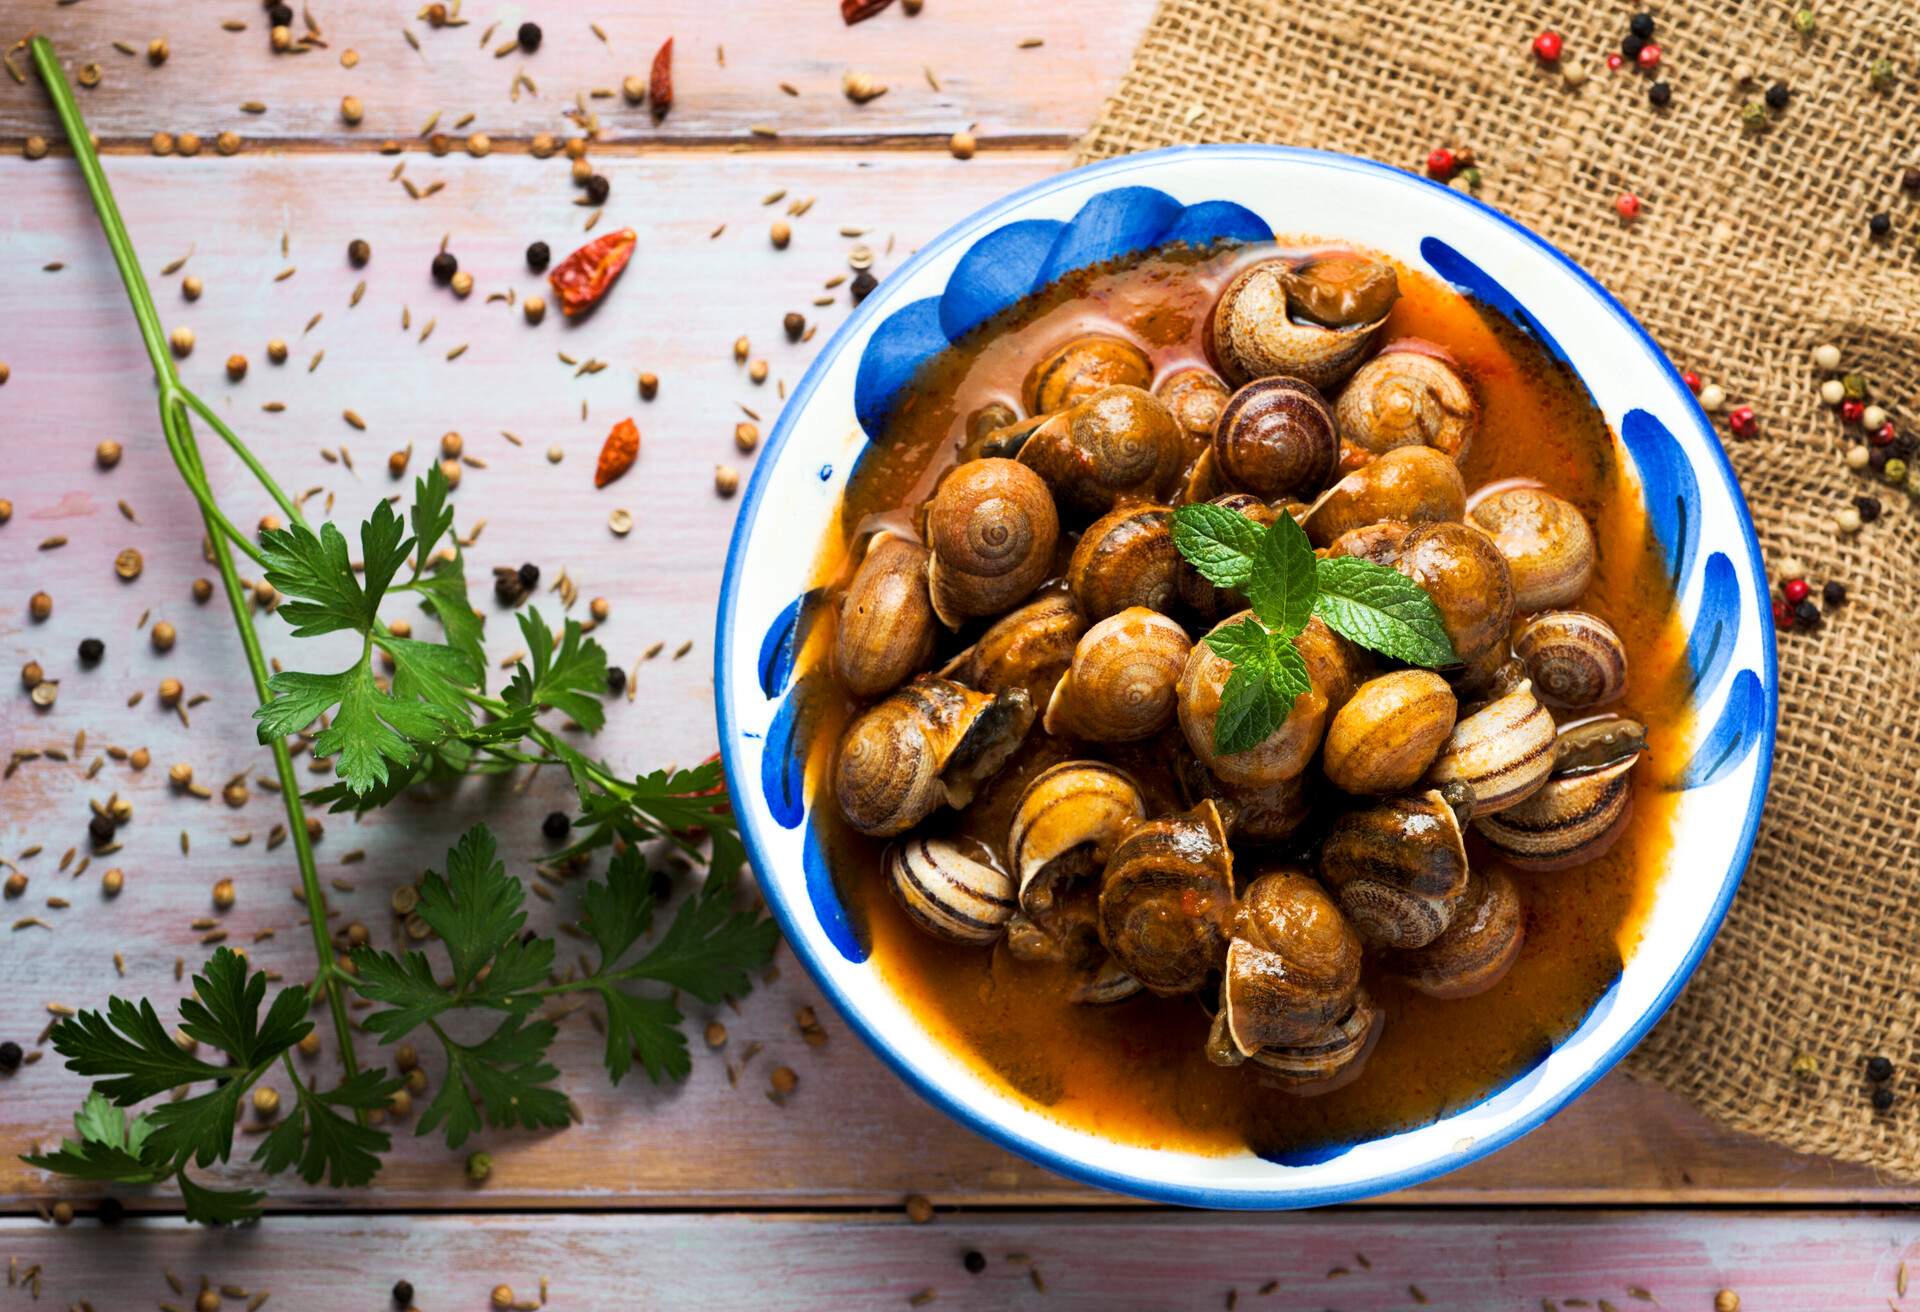 THEME-FOOD_SPANISH_SNAILS_CARACOLES-A-LA-MALLORQUINA_GettyImages-823296776